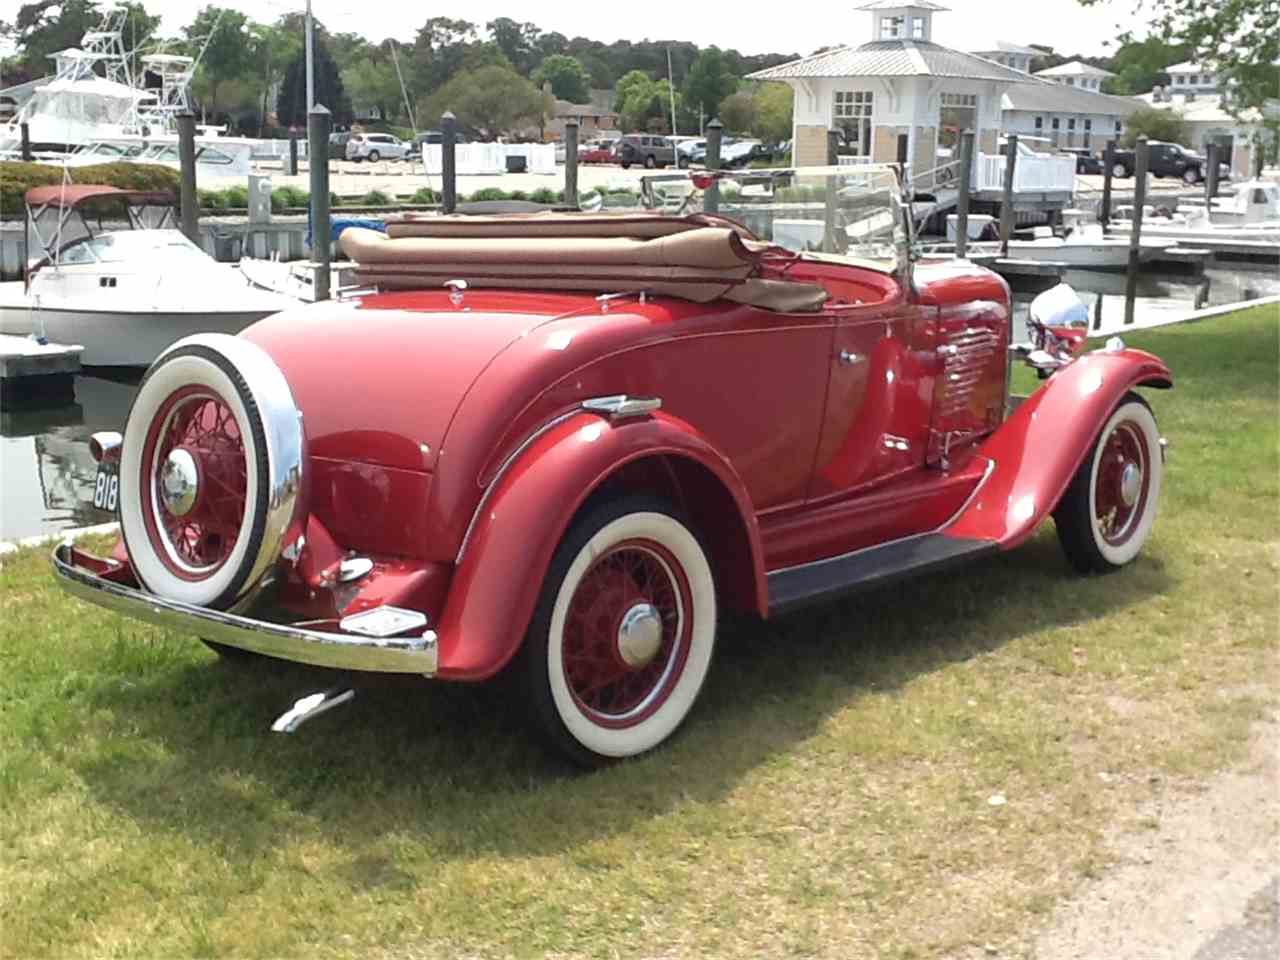 1932 Willys Roadster Model 6-90 - USA